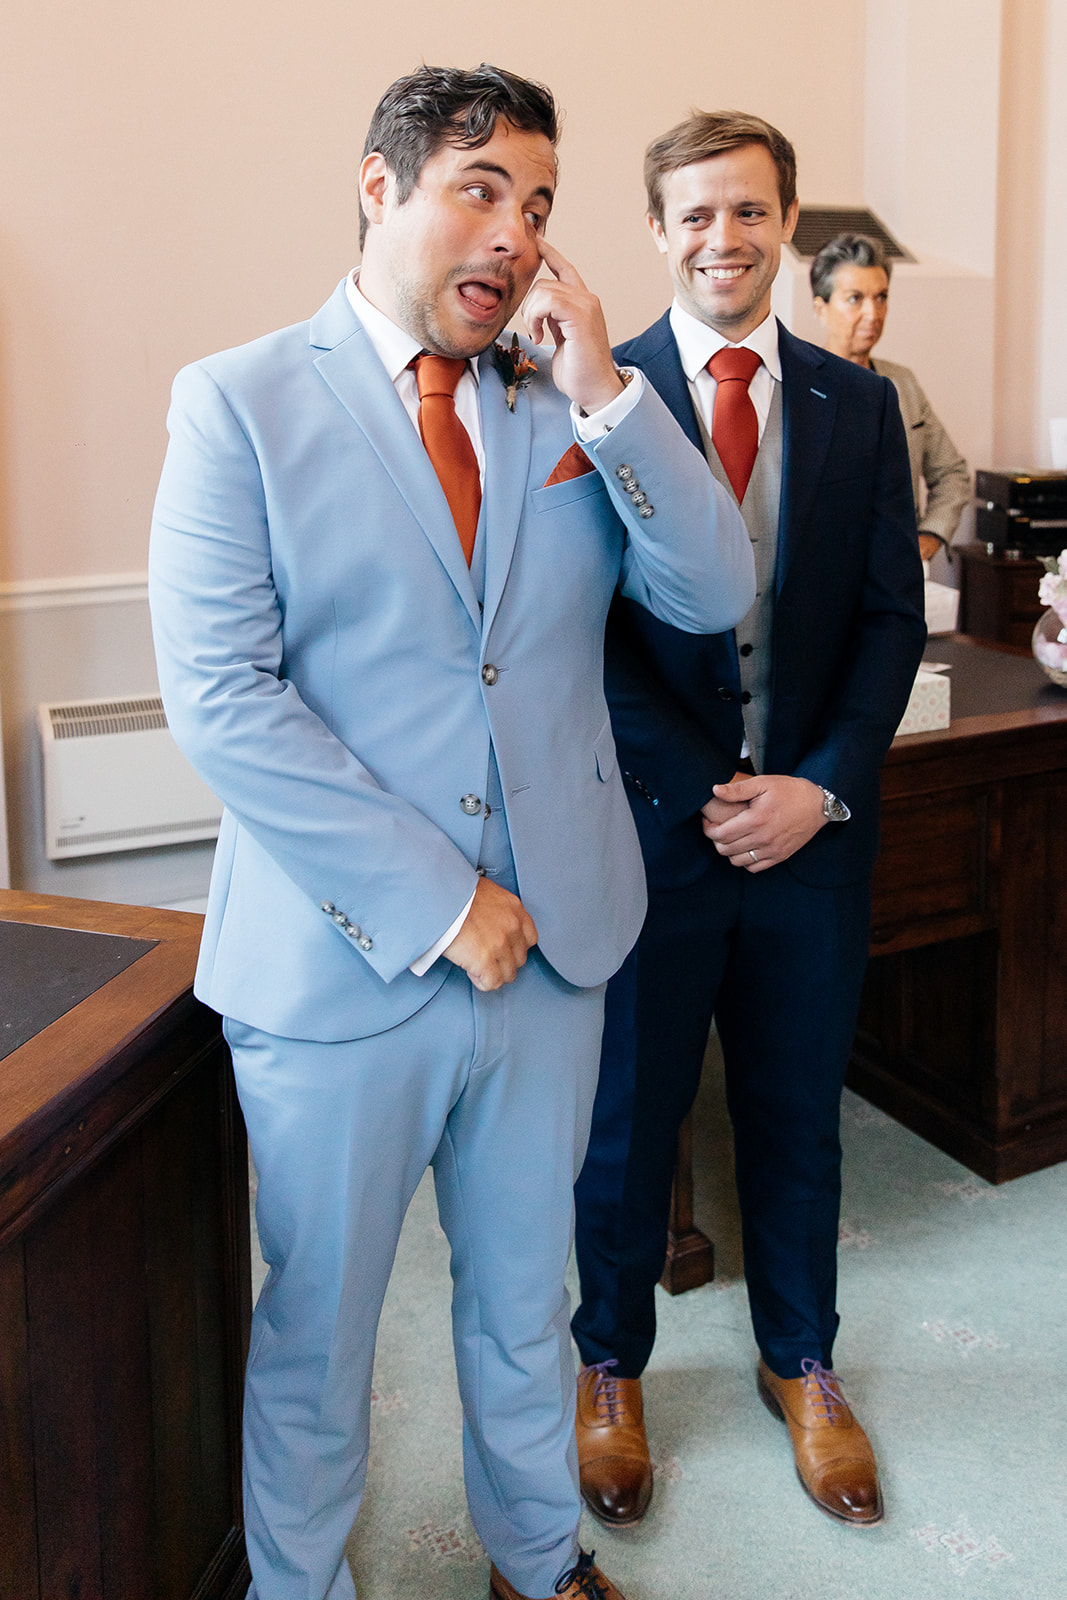 Groom waiting in the ceremony at Cheshunt Registry Office